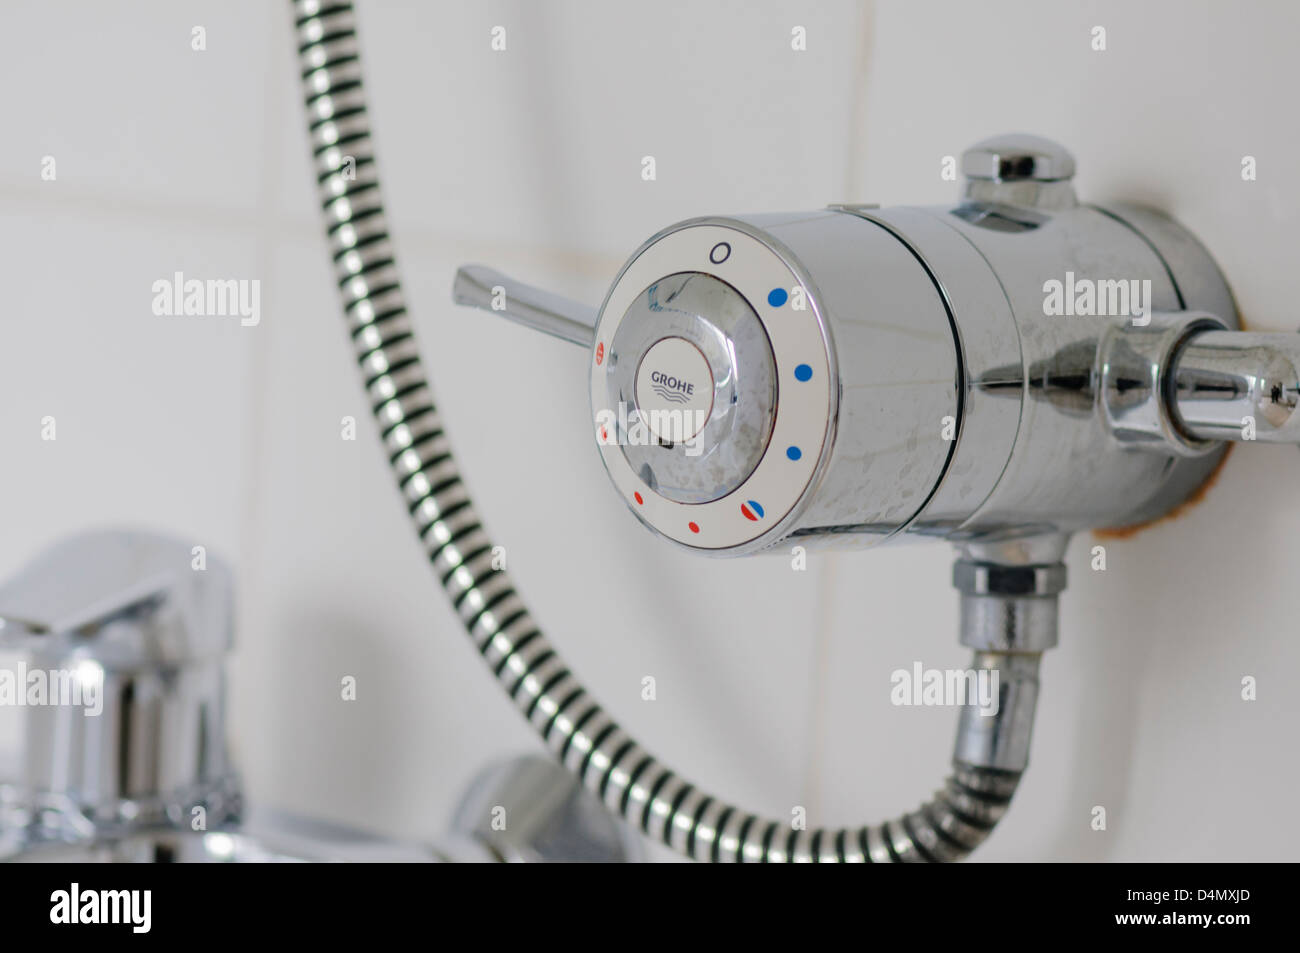 Grohe thermostatic shower mixer Stock Photo